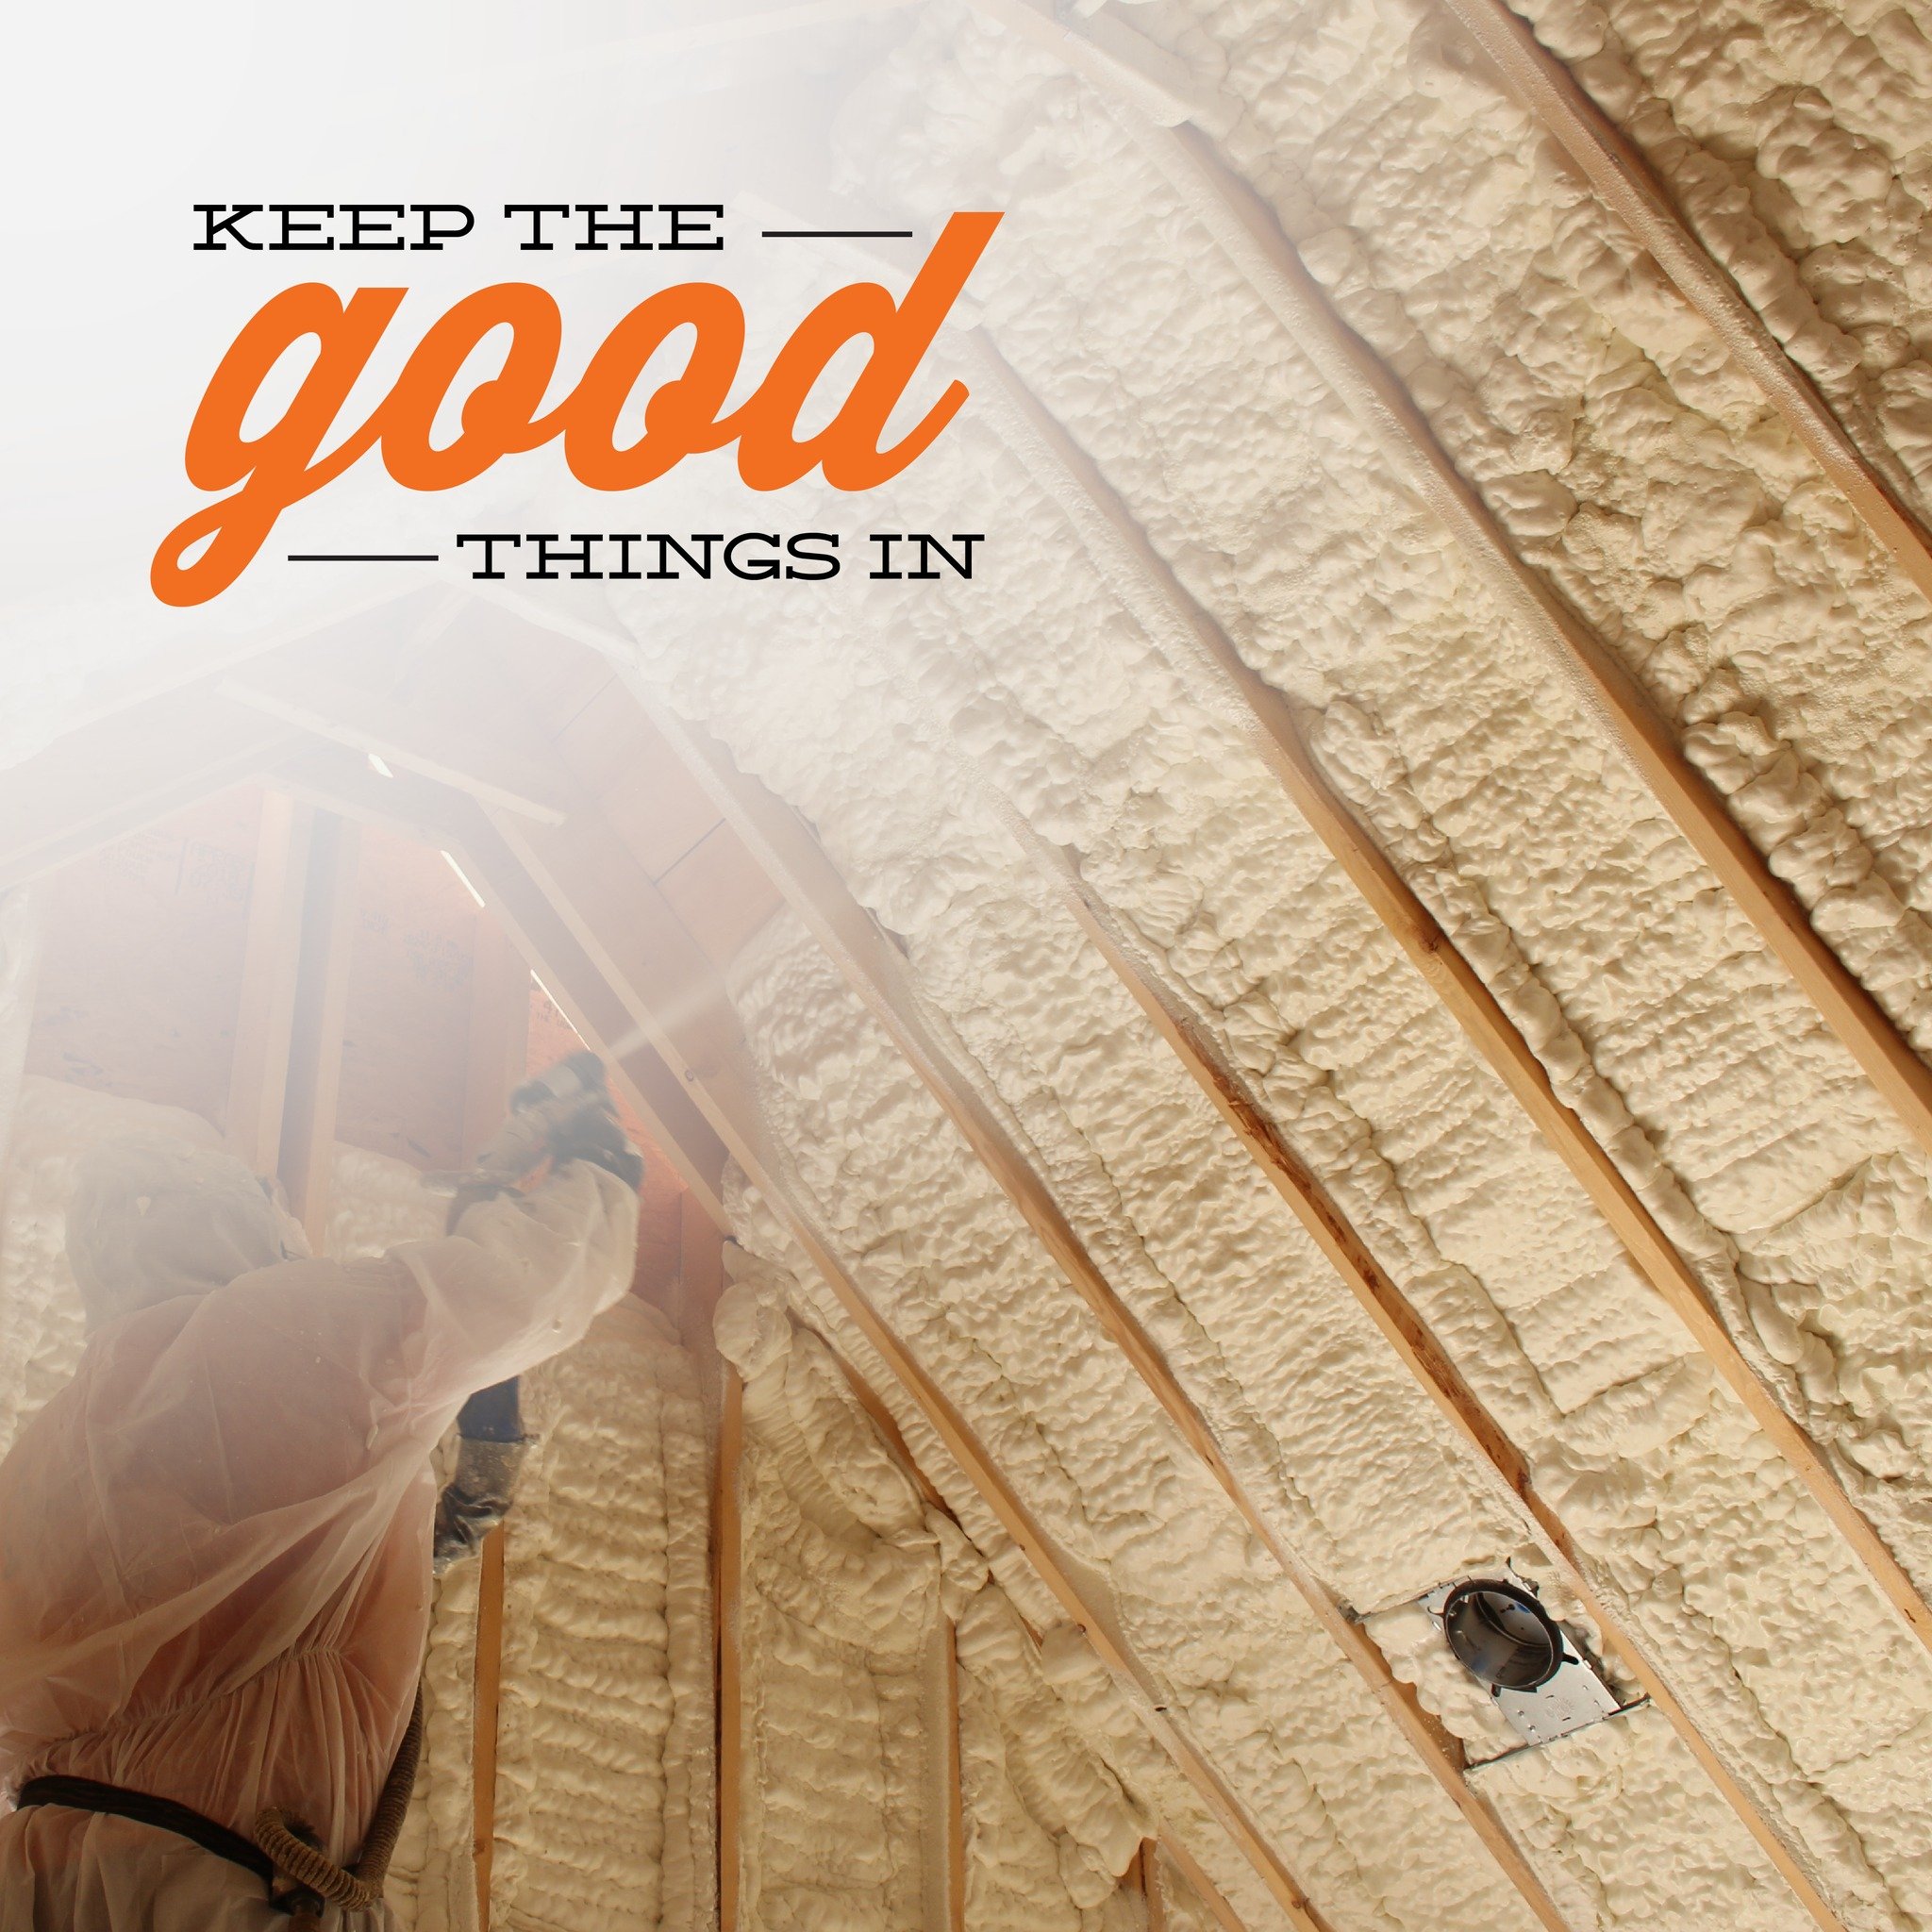 🏡✨ Keep the Good Things In! 
-
At InsulUSA, we're committed to enhancing your home's comfort and energy efficiency. Our expert spray foam insulation installers ensure that every nook and cranny is sealed, keeping conditioned air where it belongs &nd